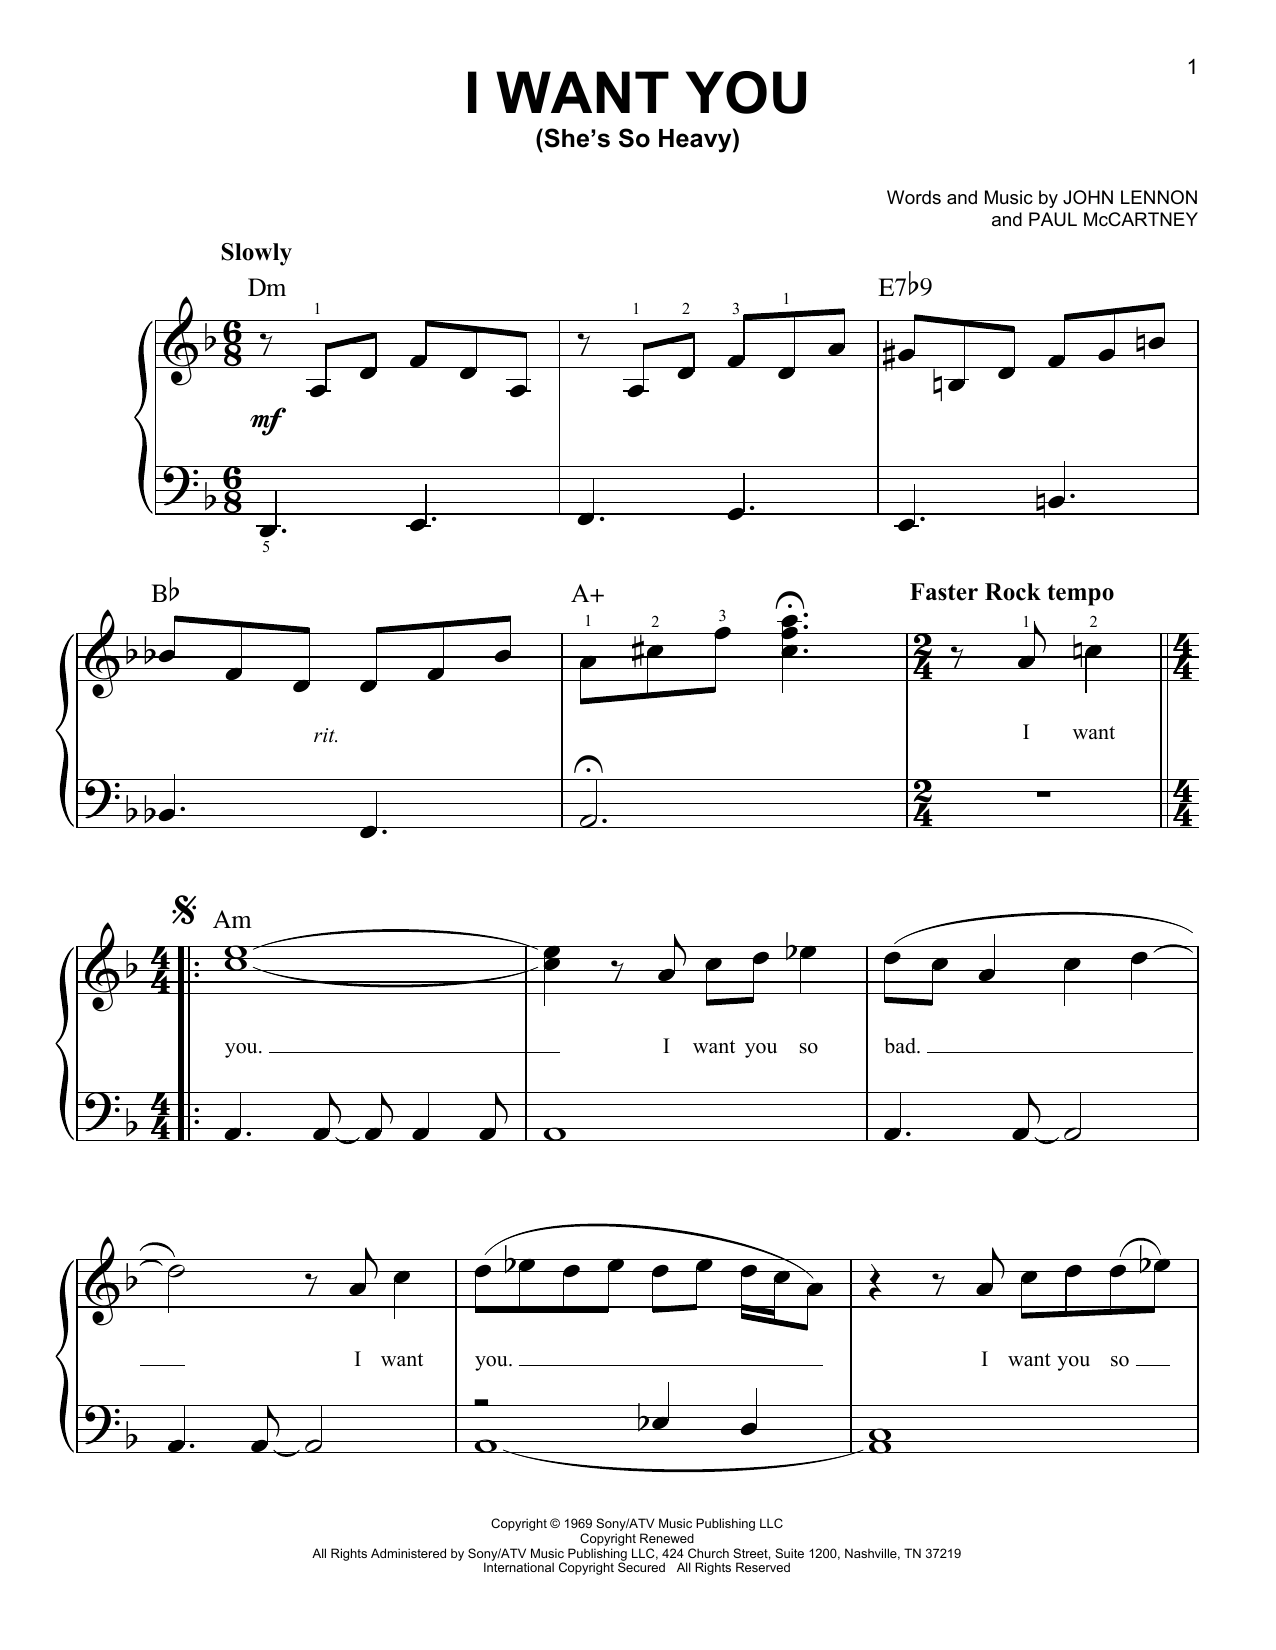 Download The Beatles I Want You (She's So Heavy) Sheet Music